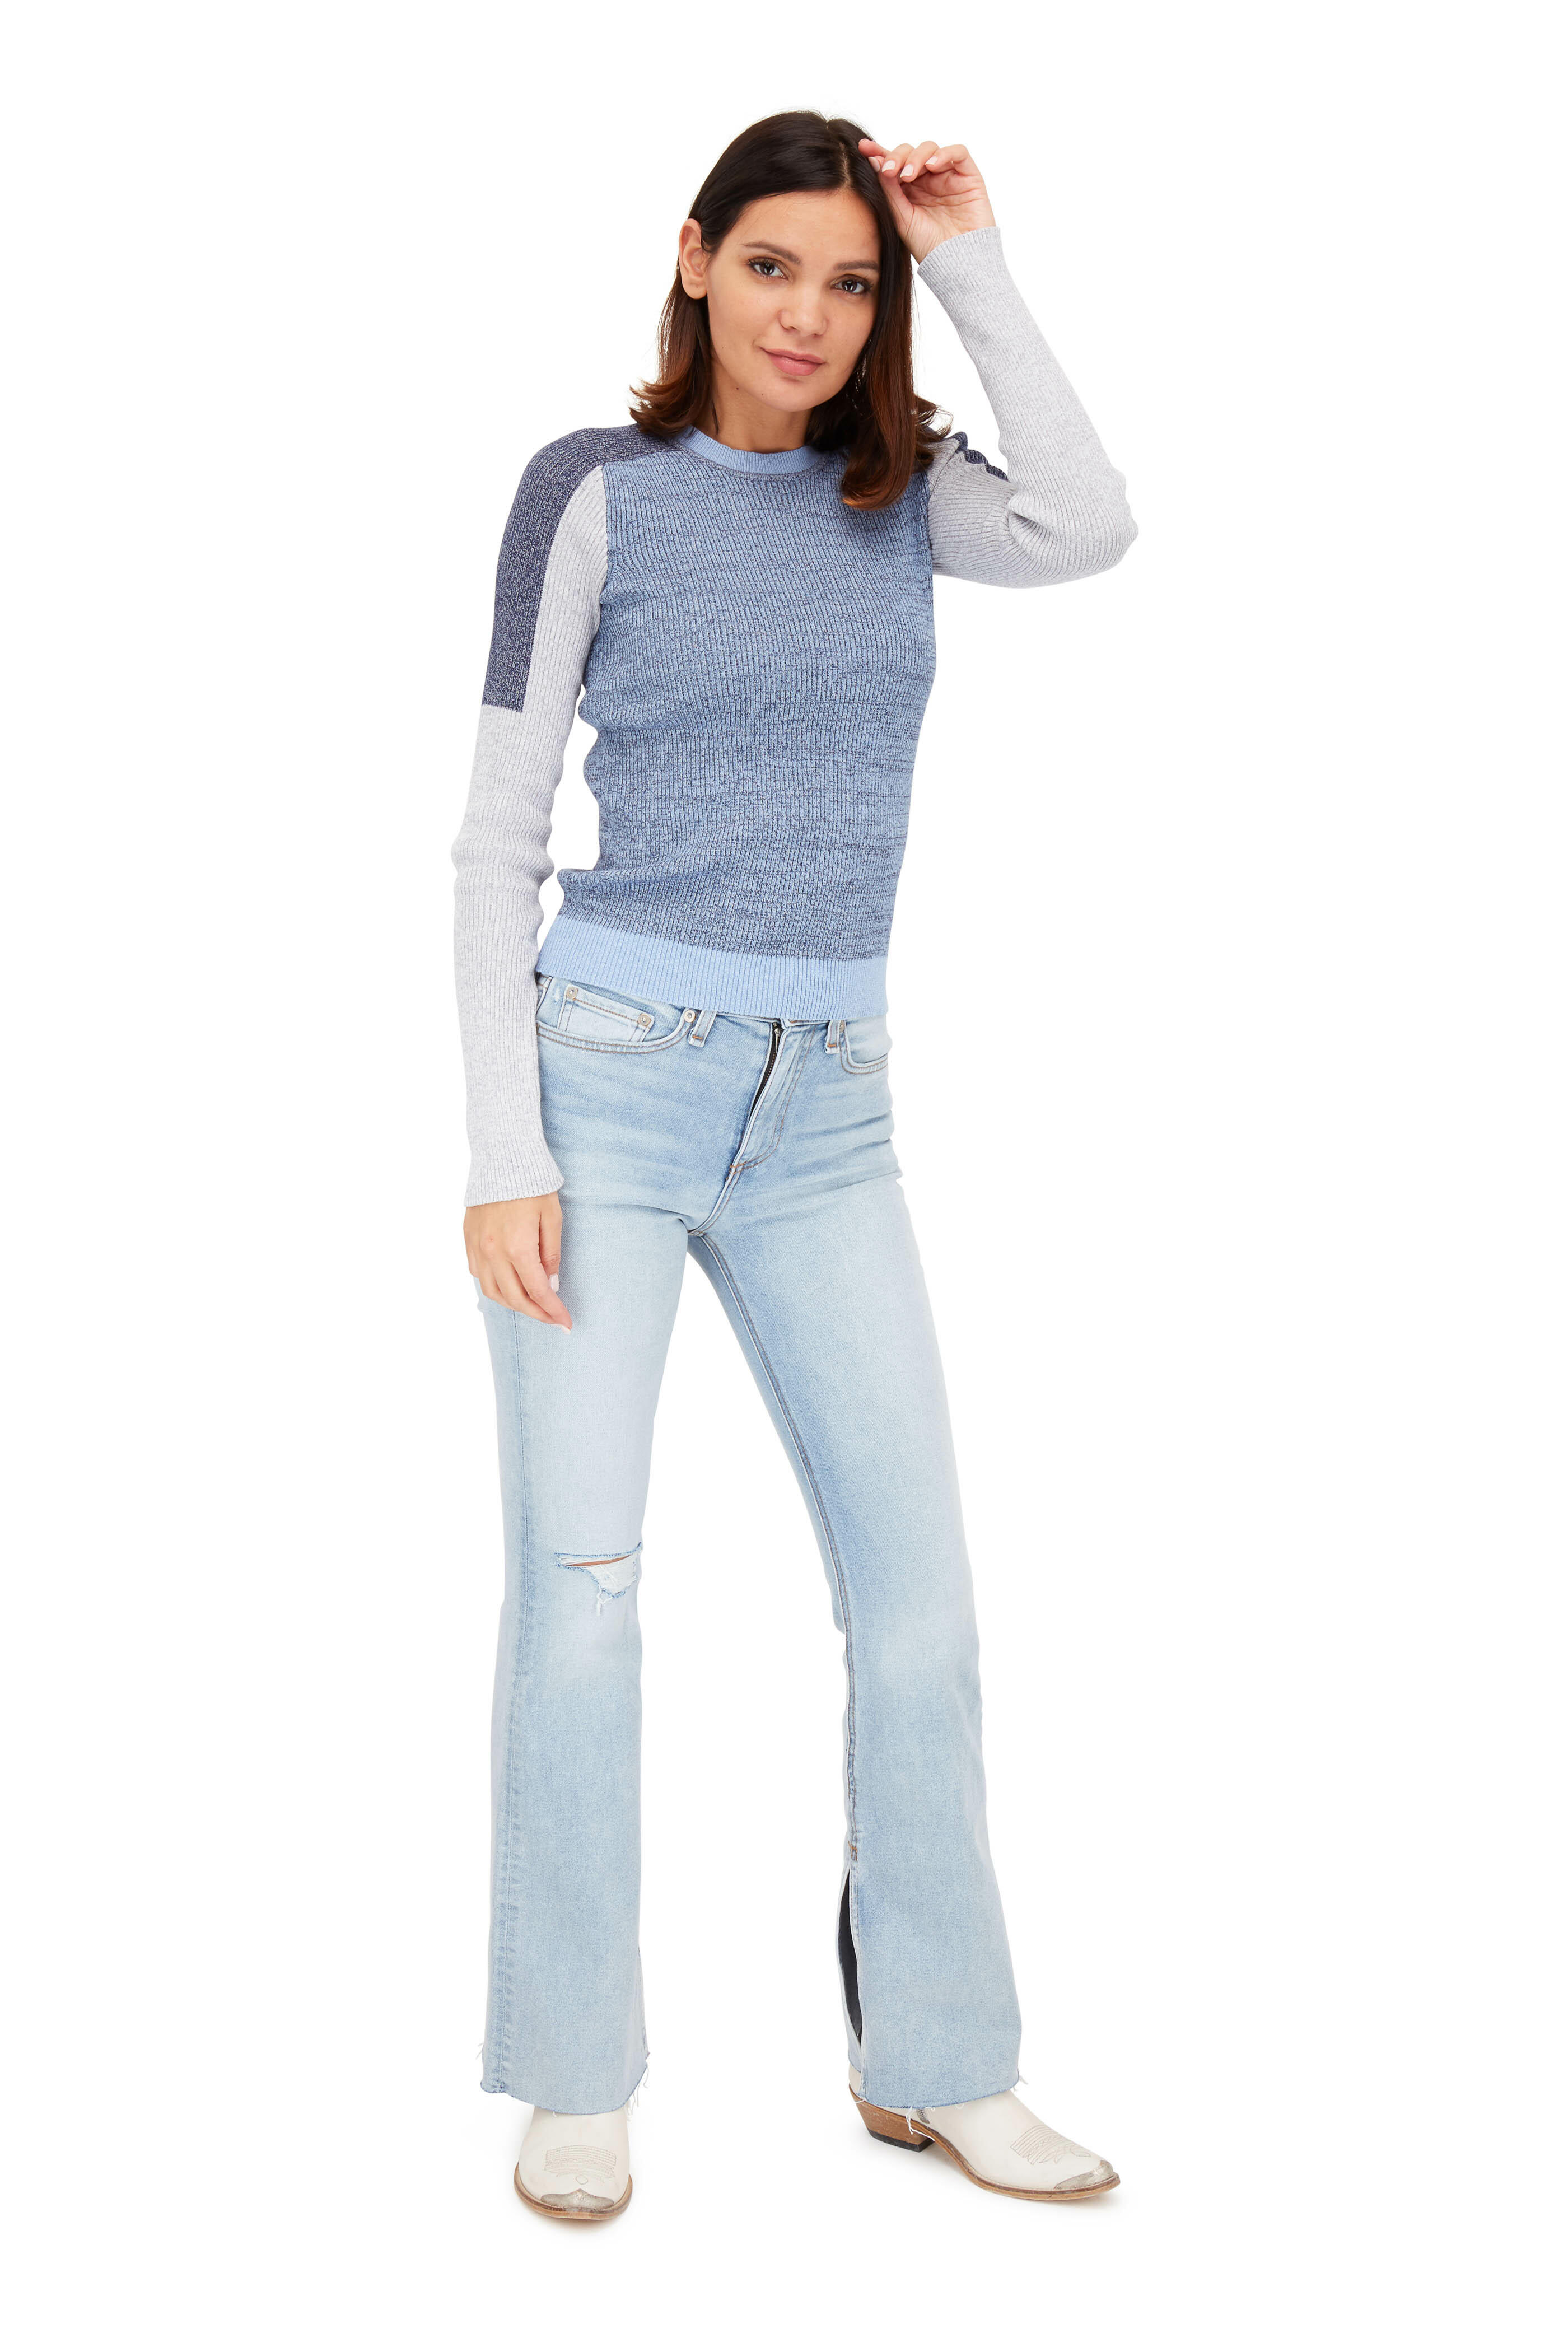 The Bling Thing Two Tone Drop Shoulder Denim Sleeve Knit Sweater S/M